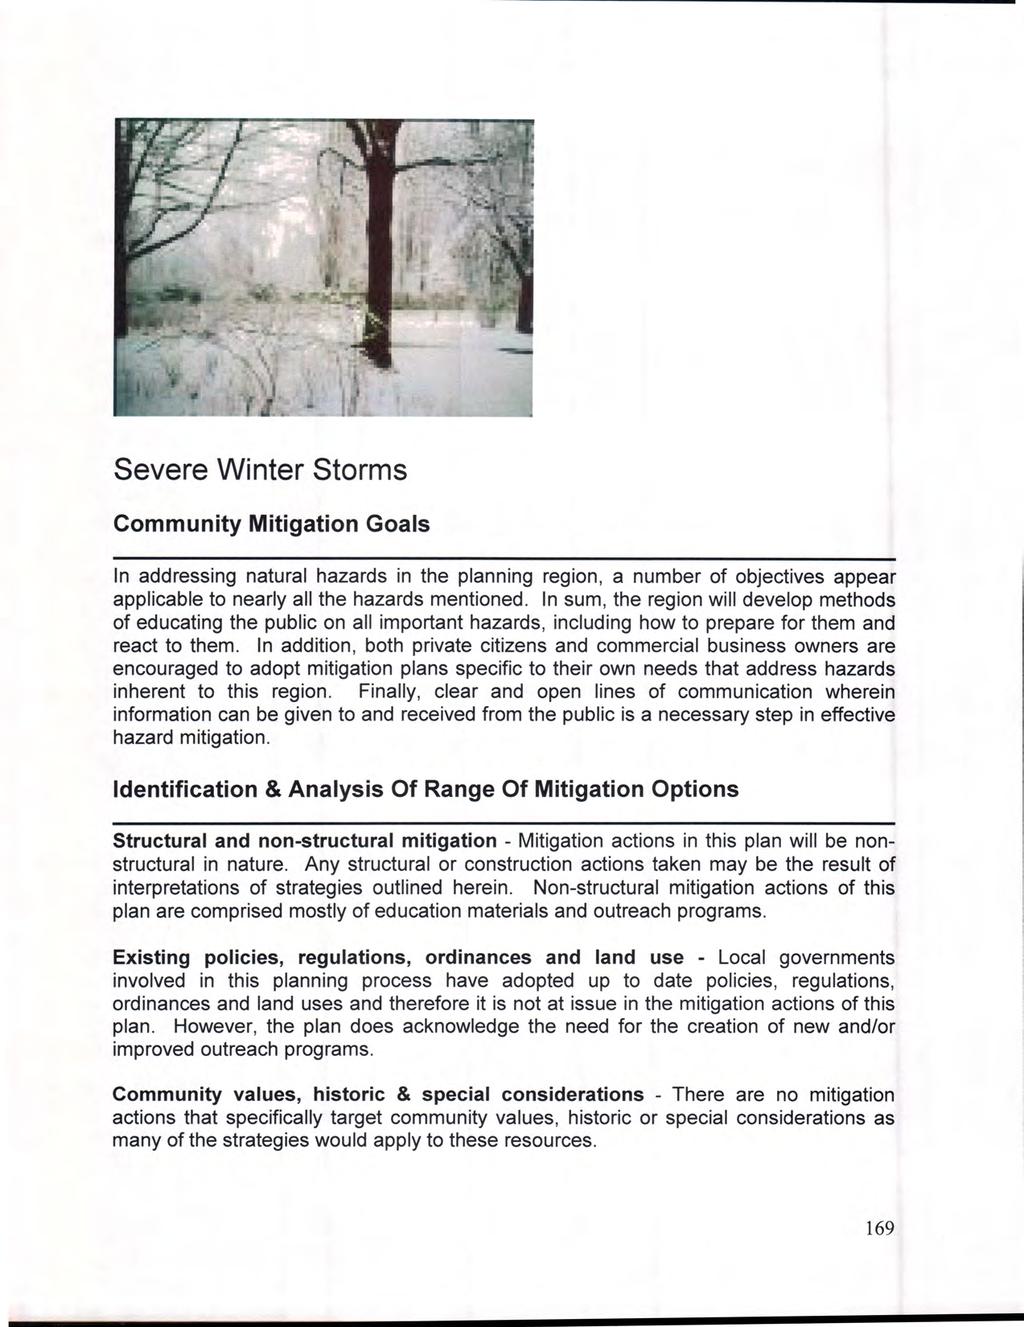 Severe Winter Storms Community Mitigation Goals In addressing natural hazards in the planning region, a number of objectives appear applicable to nearly all the hazards mentioned.